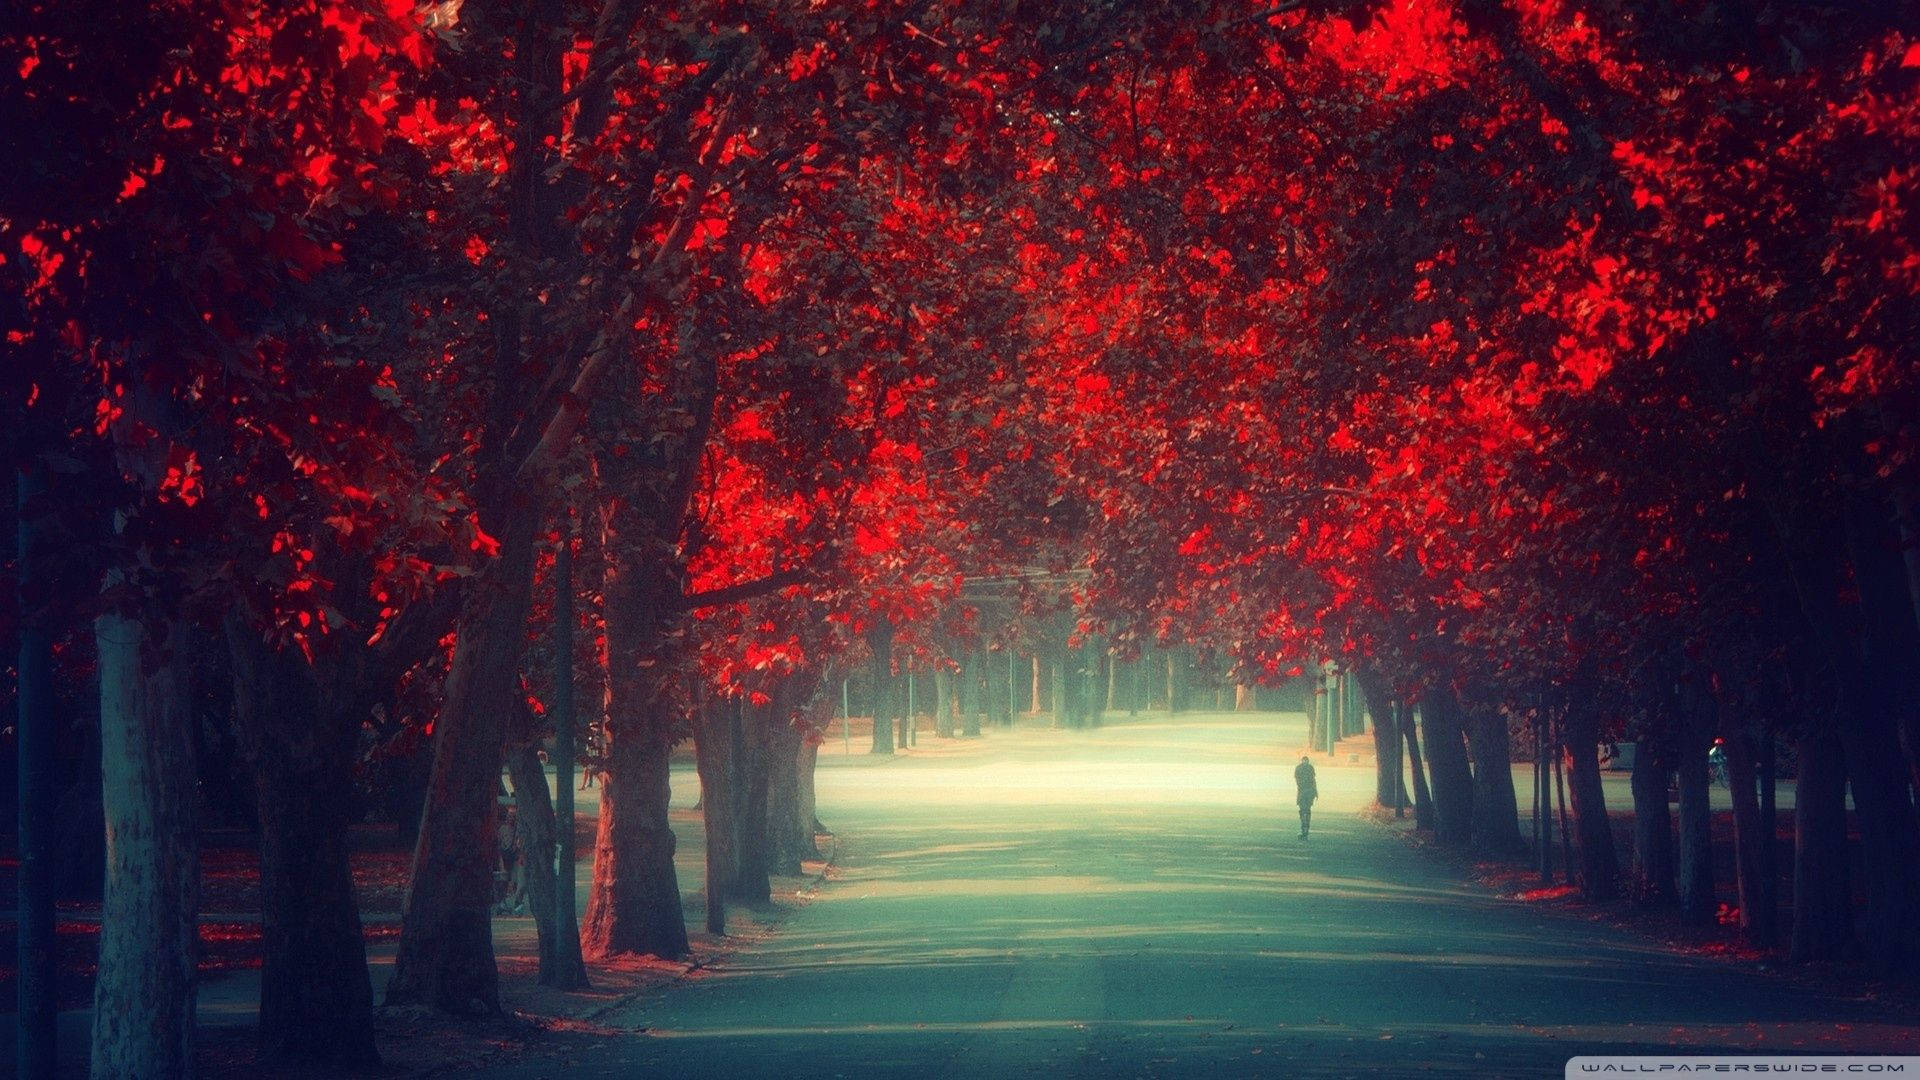 HD wallpaper of person walking a path surrounded by red leafed trees. 